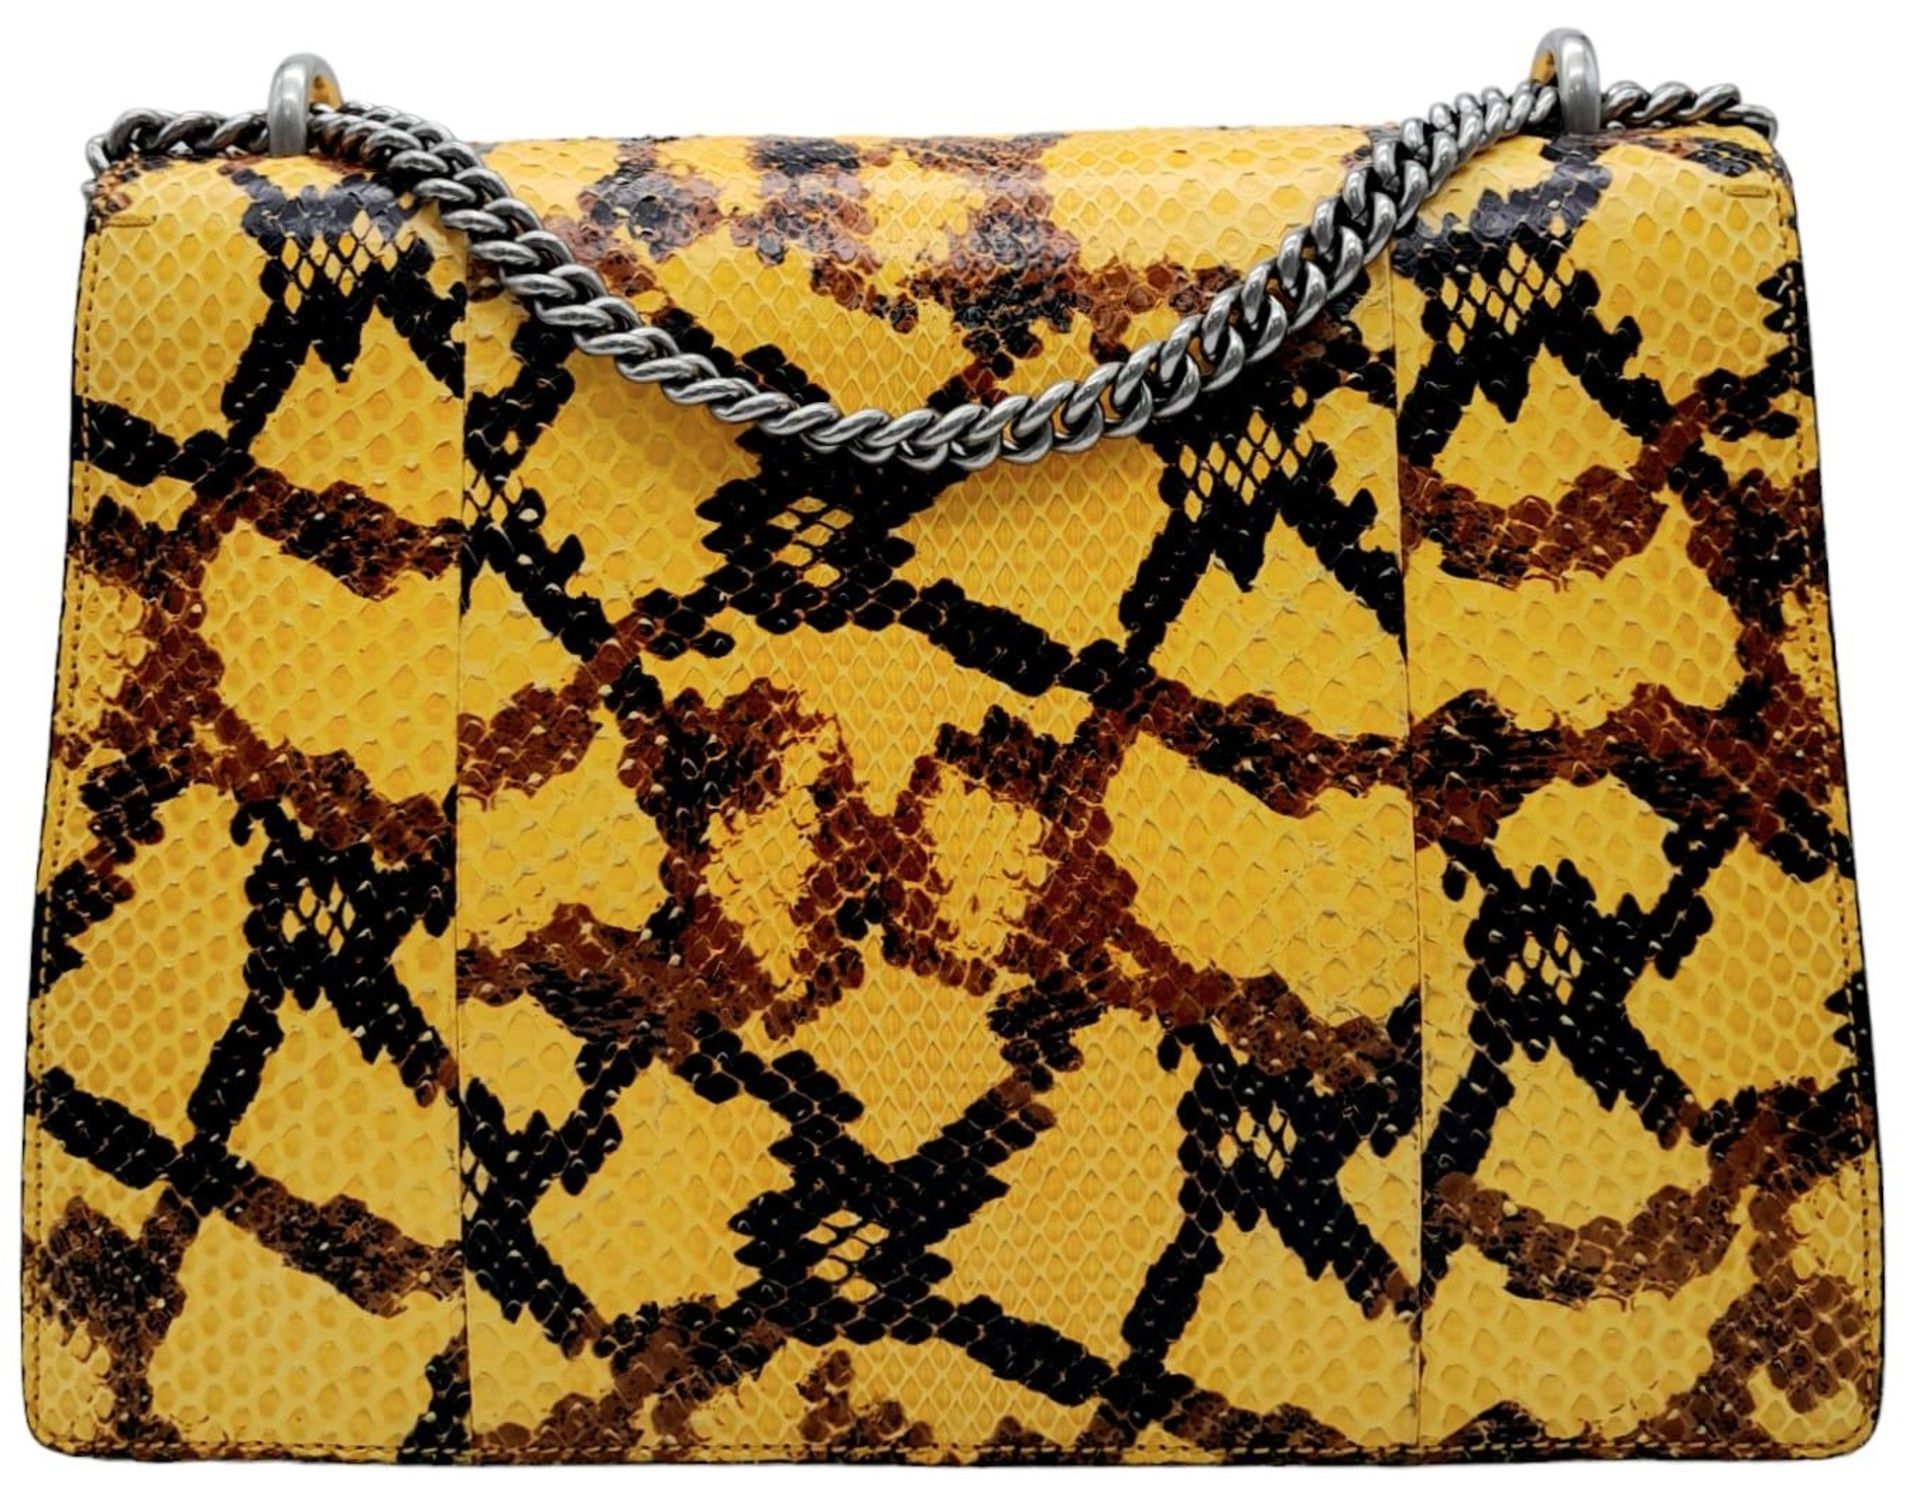 A Gucci Dionysus Python Pochette. With Silver Metal Hardware and Convertible Silver Metal Chain - Image 4 of 11